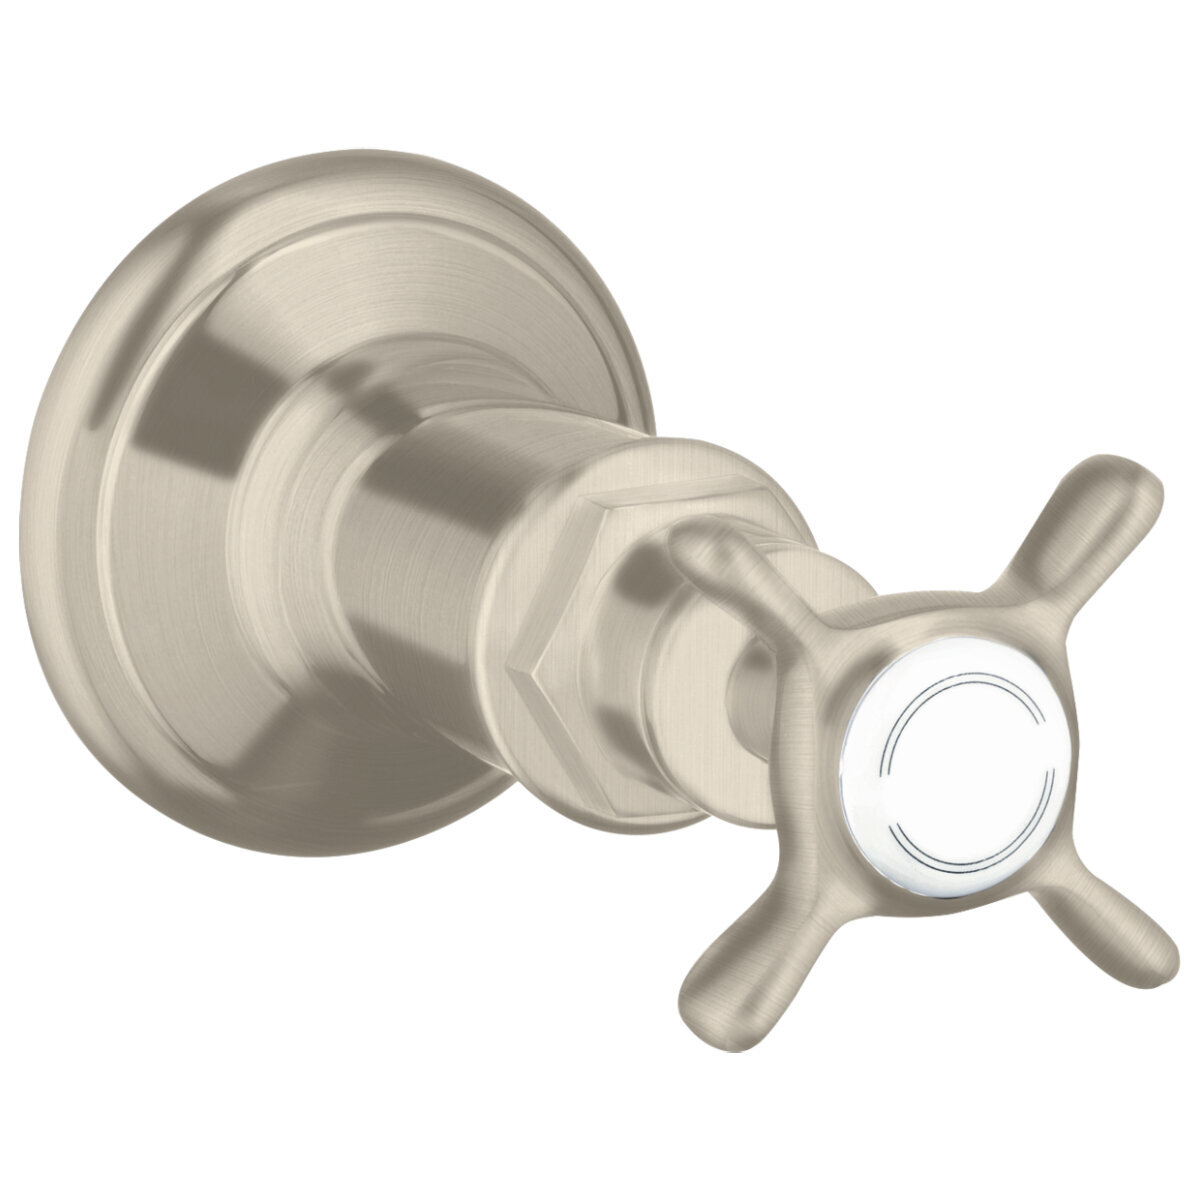 Axor Montreux Shut-Off Valve with Cross Handle Brushed Nickel 16871820  Winning Appliances